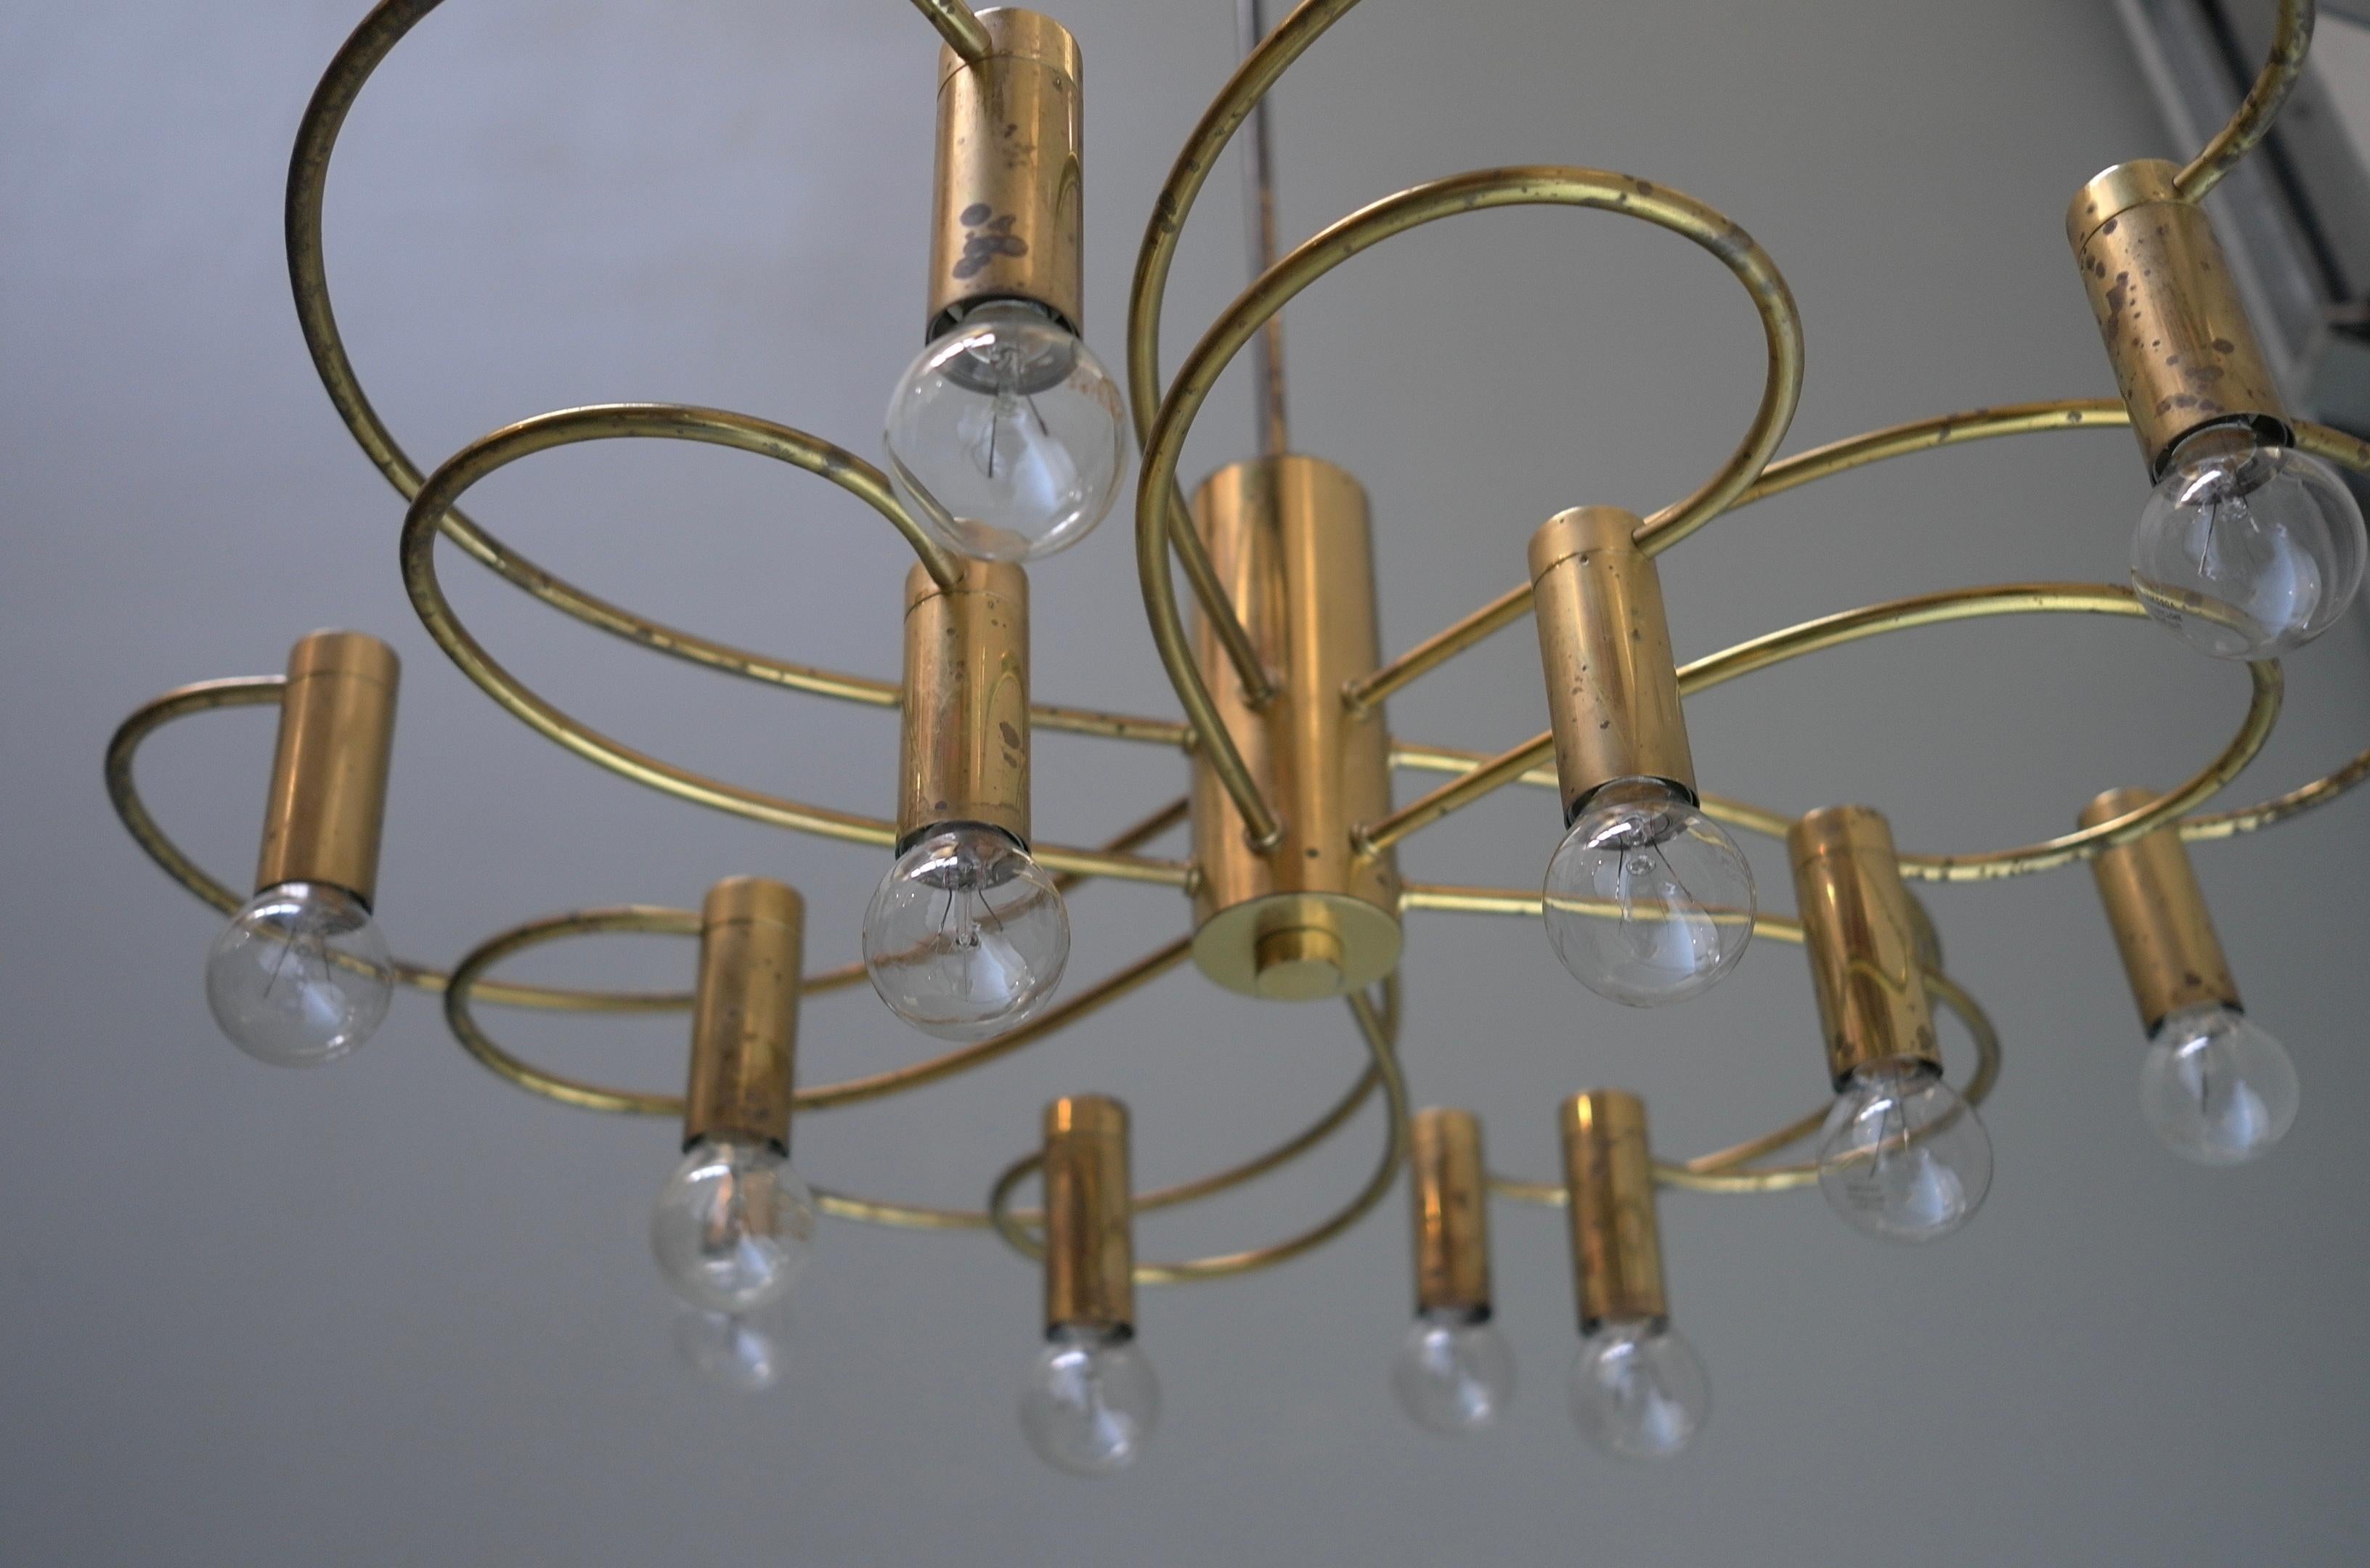 Gaetano Brass Sciolari Twelve-light chandelier, Italy, 1960s.

In very good vintage condition with beautiful Patina to the brass. Three lamps are available, priced per piece.